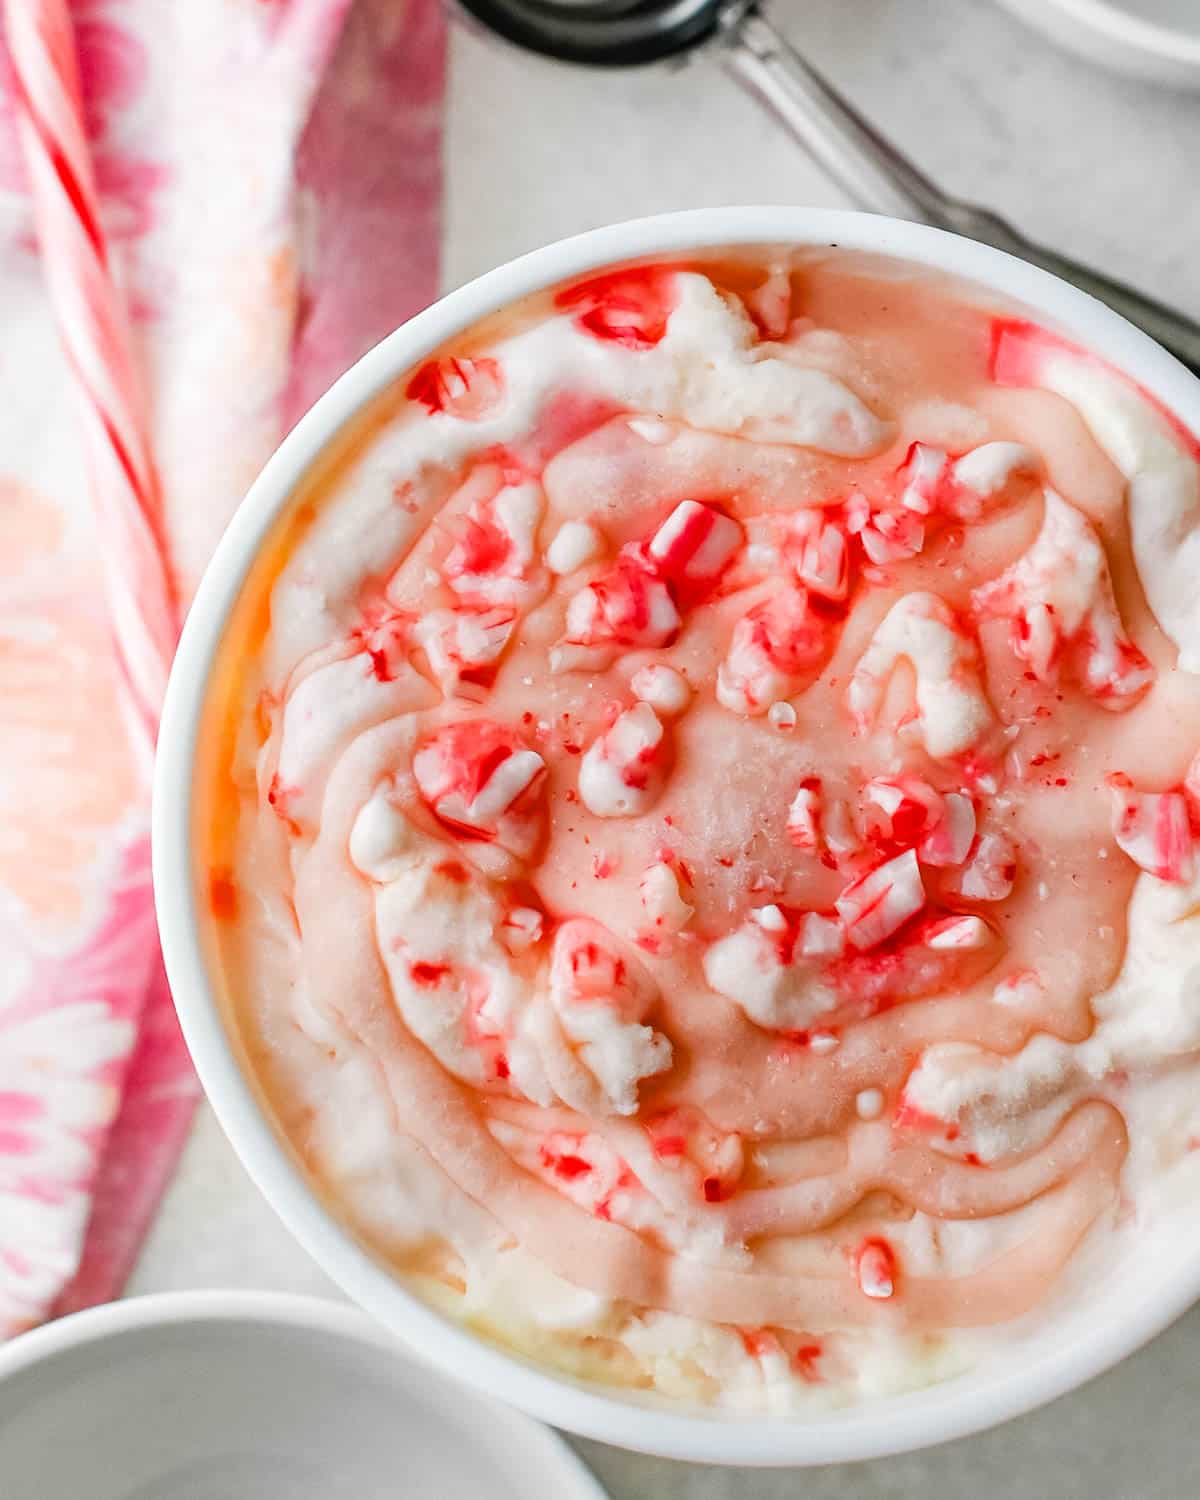 A quart of peppermint ice cream with candy canes on top.